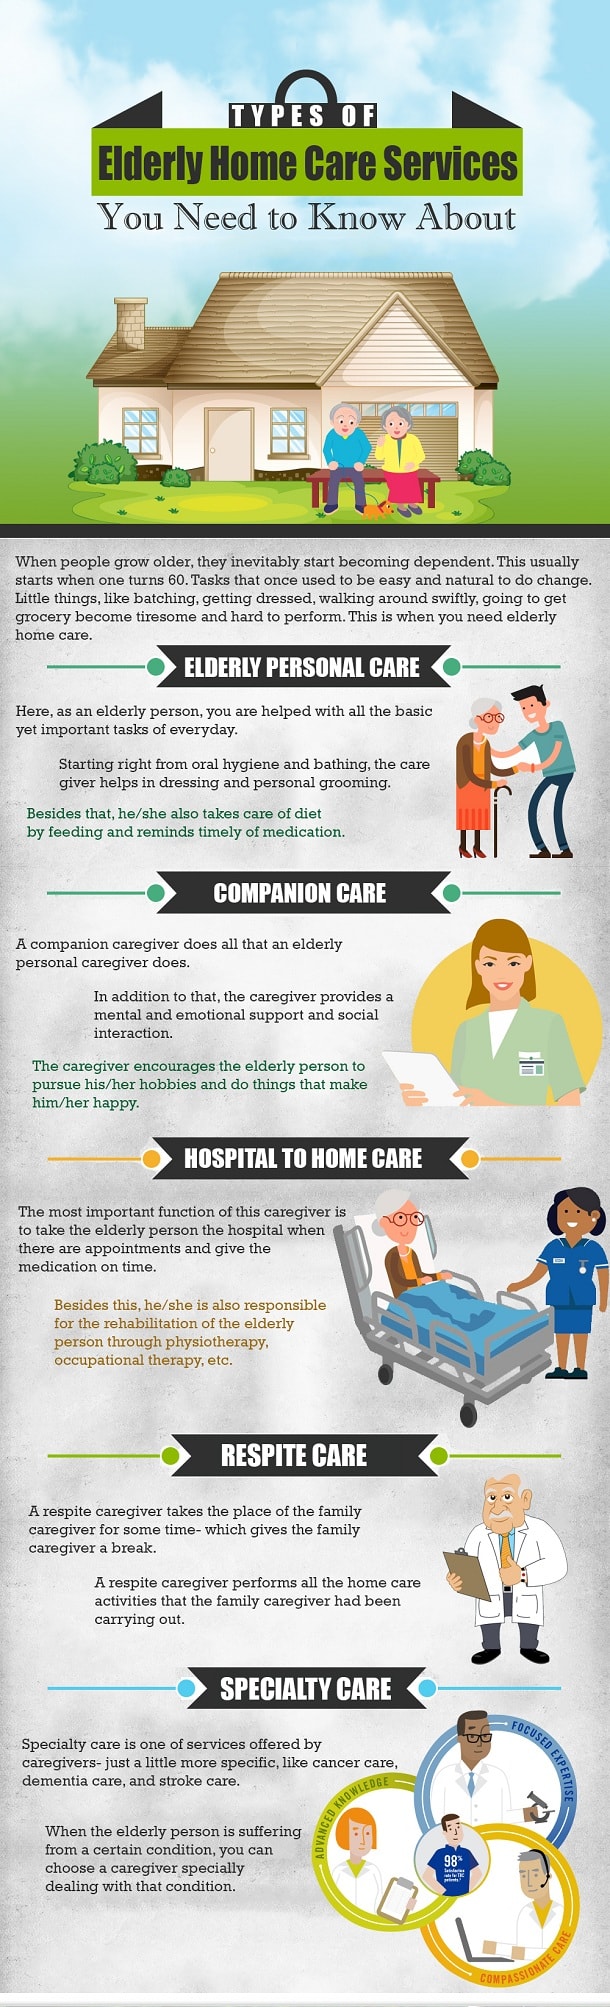 Types of Elderly Home Care Services